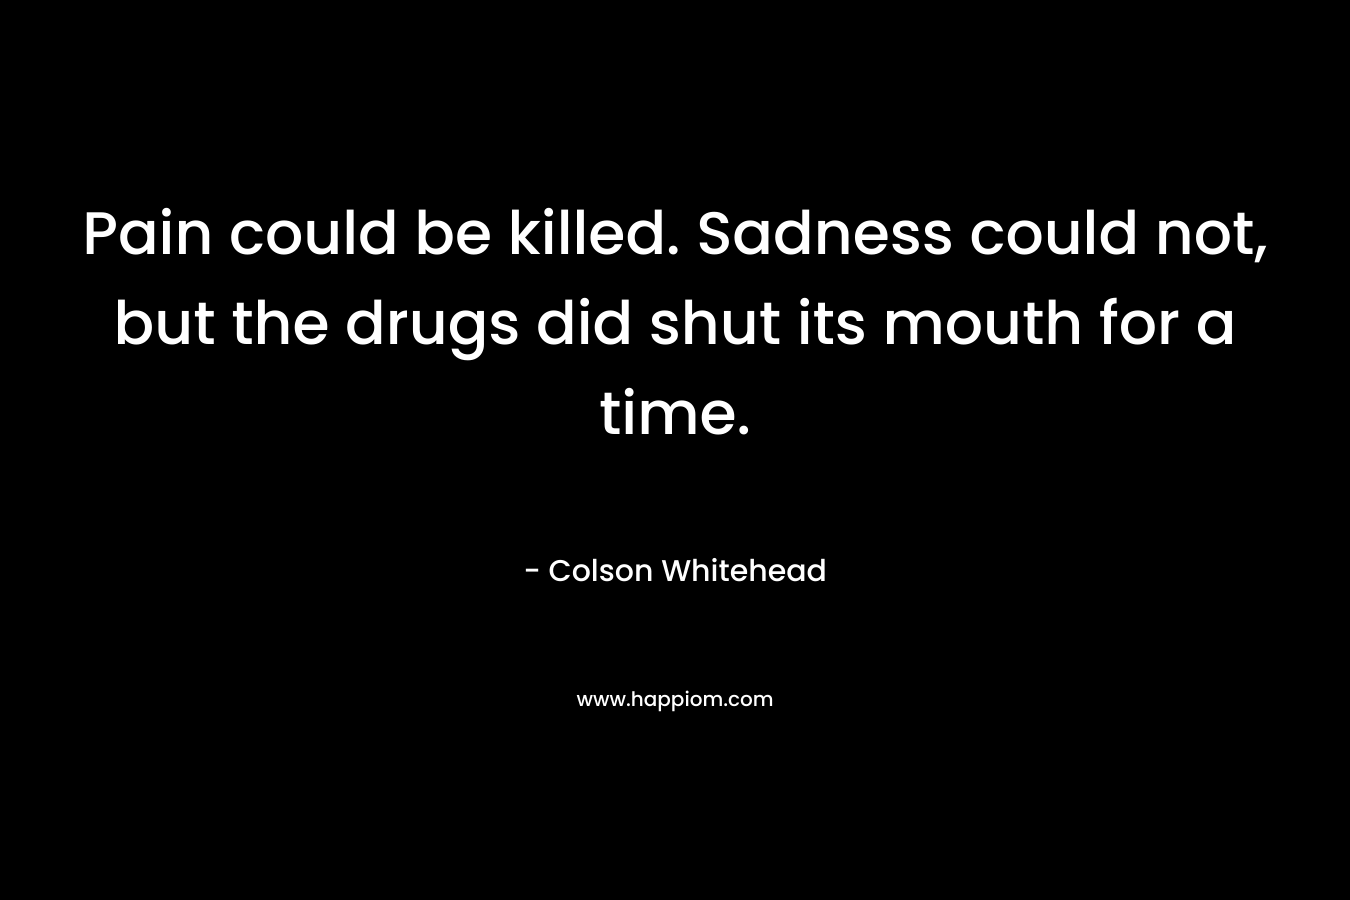 Pain could be killed. Sadness could not, but the drugs did shut its mouth for a time.